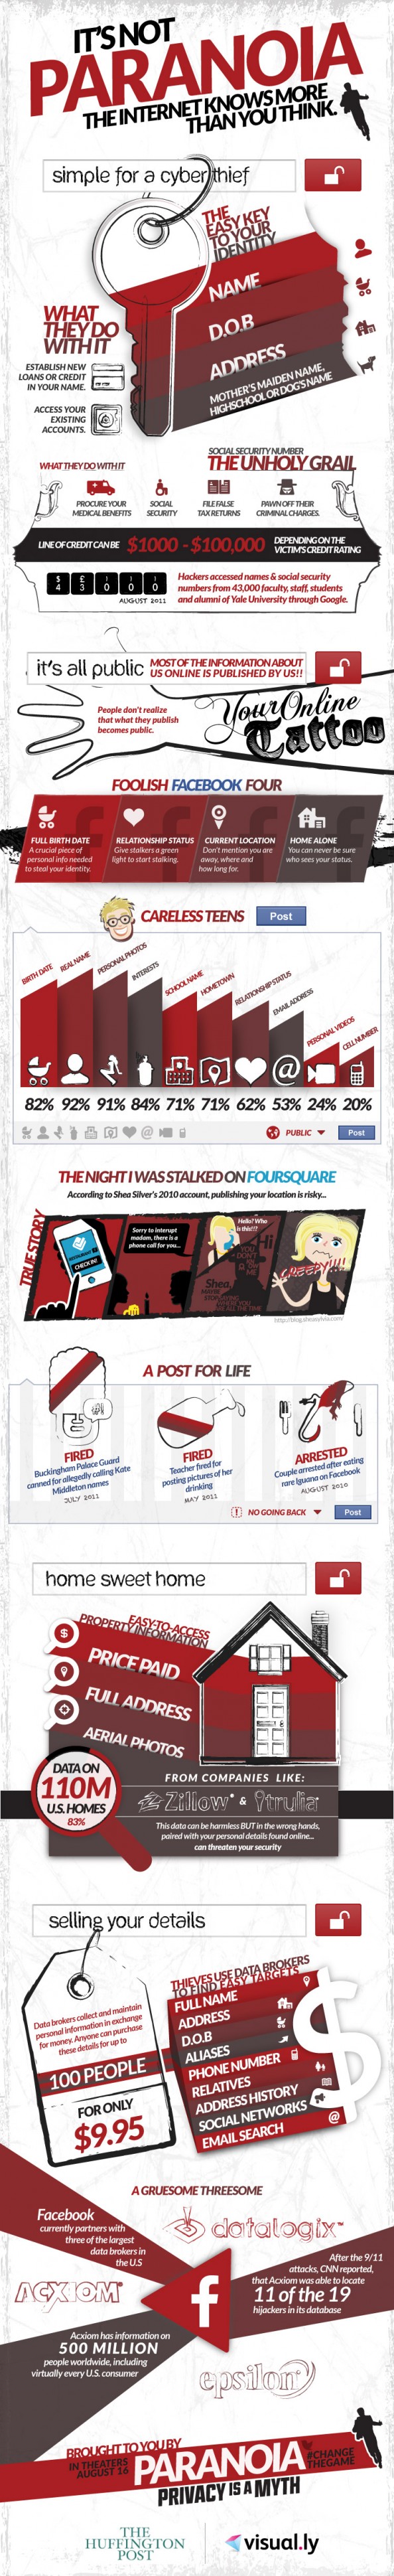 Infographie 37 - privacy-paranoia-or-truth-infographic